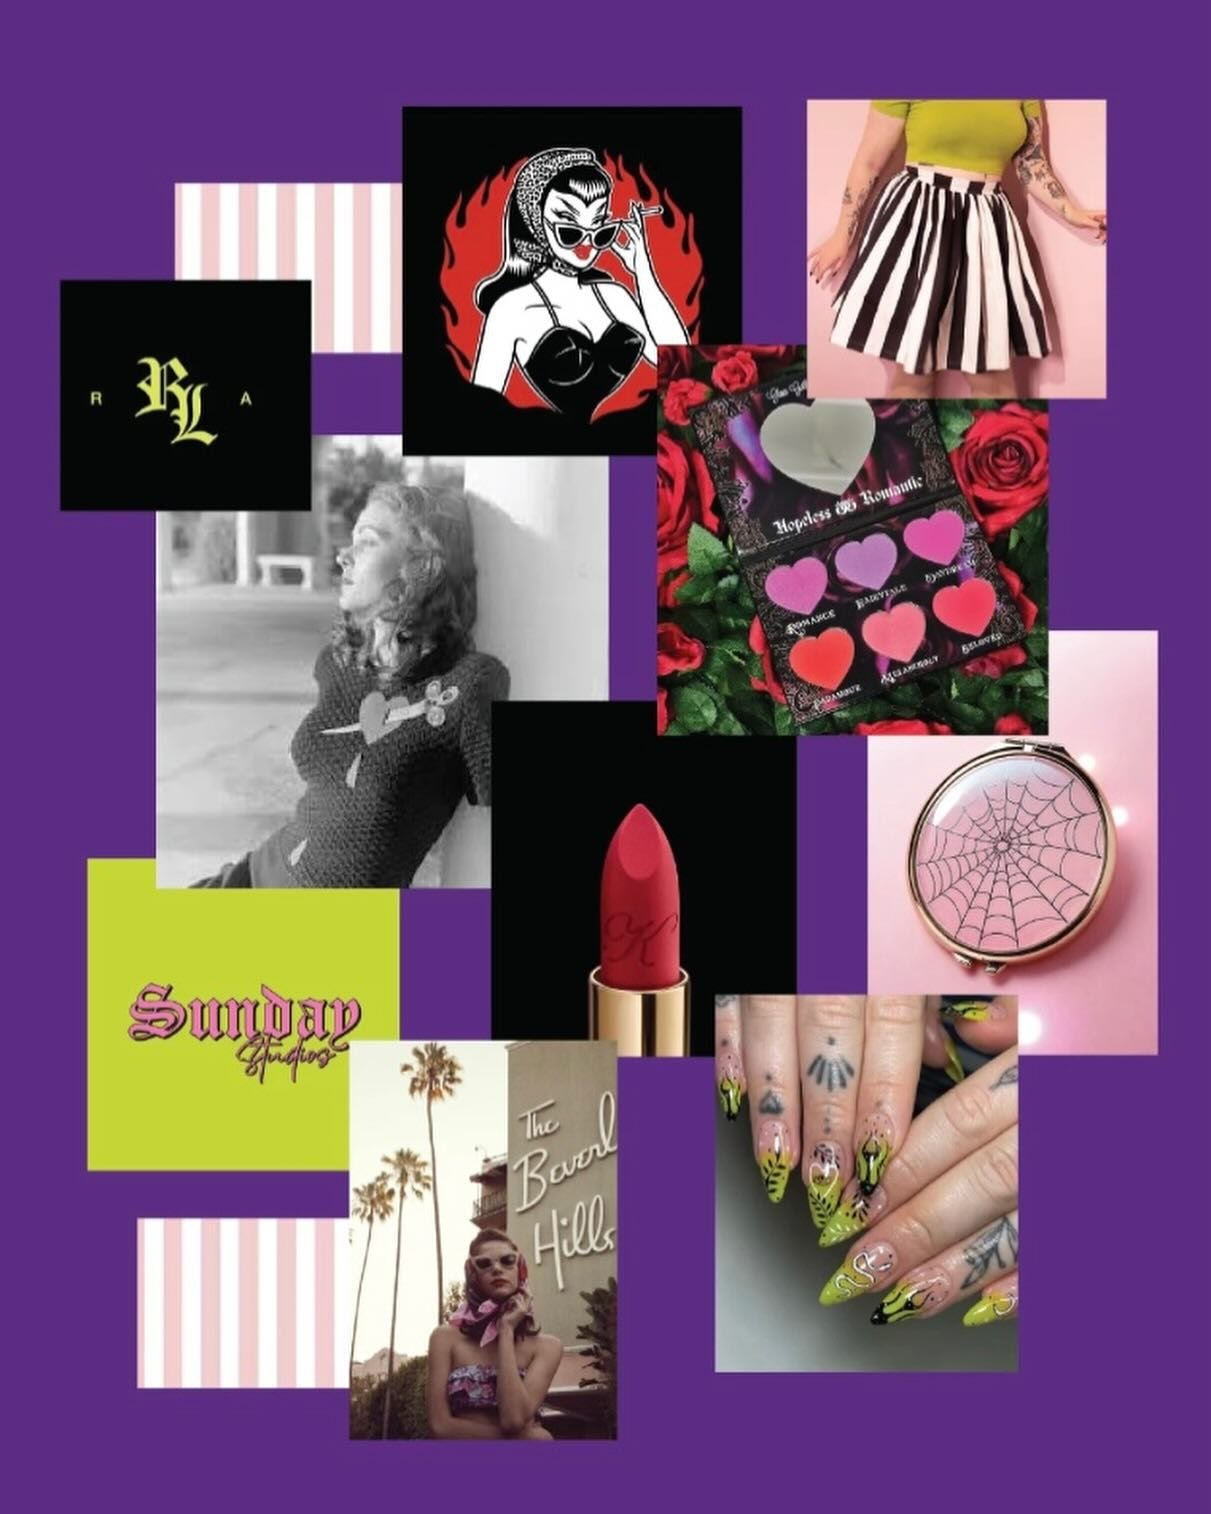 Current mood board and color inspiration 😍😍😍. I am so grateful for all the cool women-led businesses I get to work  with and I am super stoked about this spooky / vintage inspired beauty branding project! 
🖤&hearts;️💜🦇🕸️💄